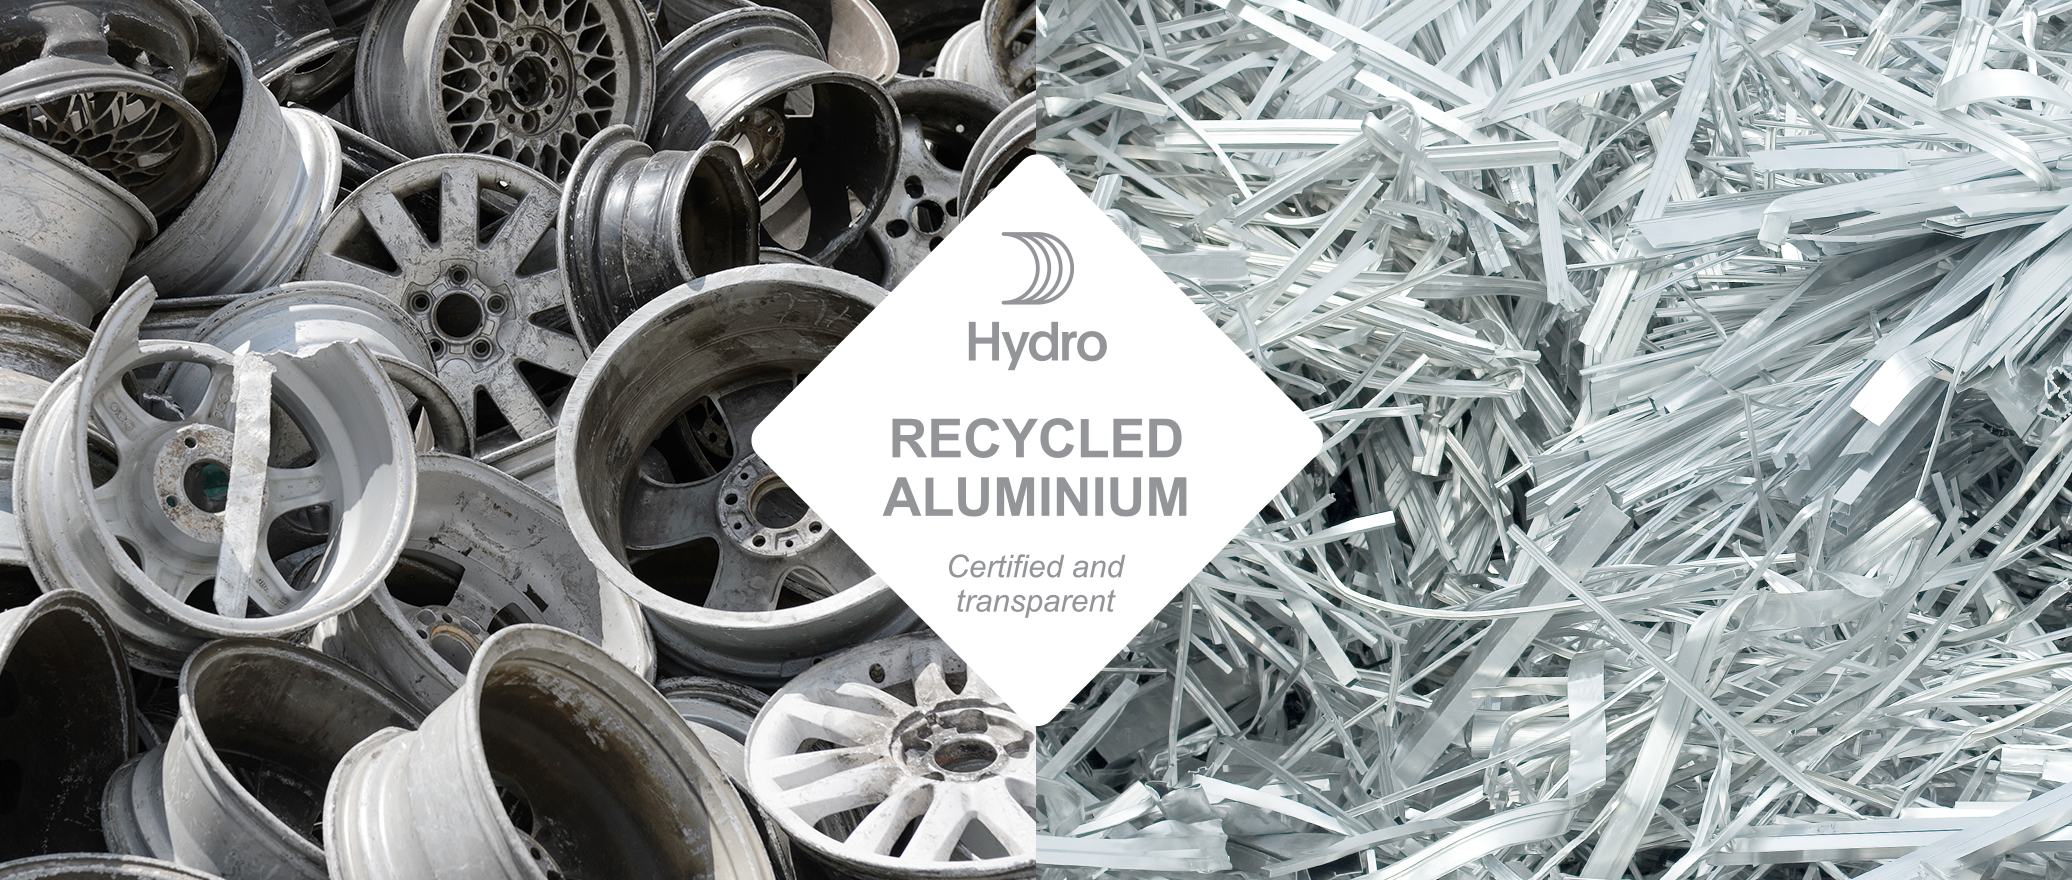 https://www.hydro.com/globalassets/01-products--services/low-carbon/recycled_aluminium_tag_pre_post_scrap_1036x440_v01.jpg